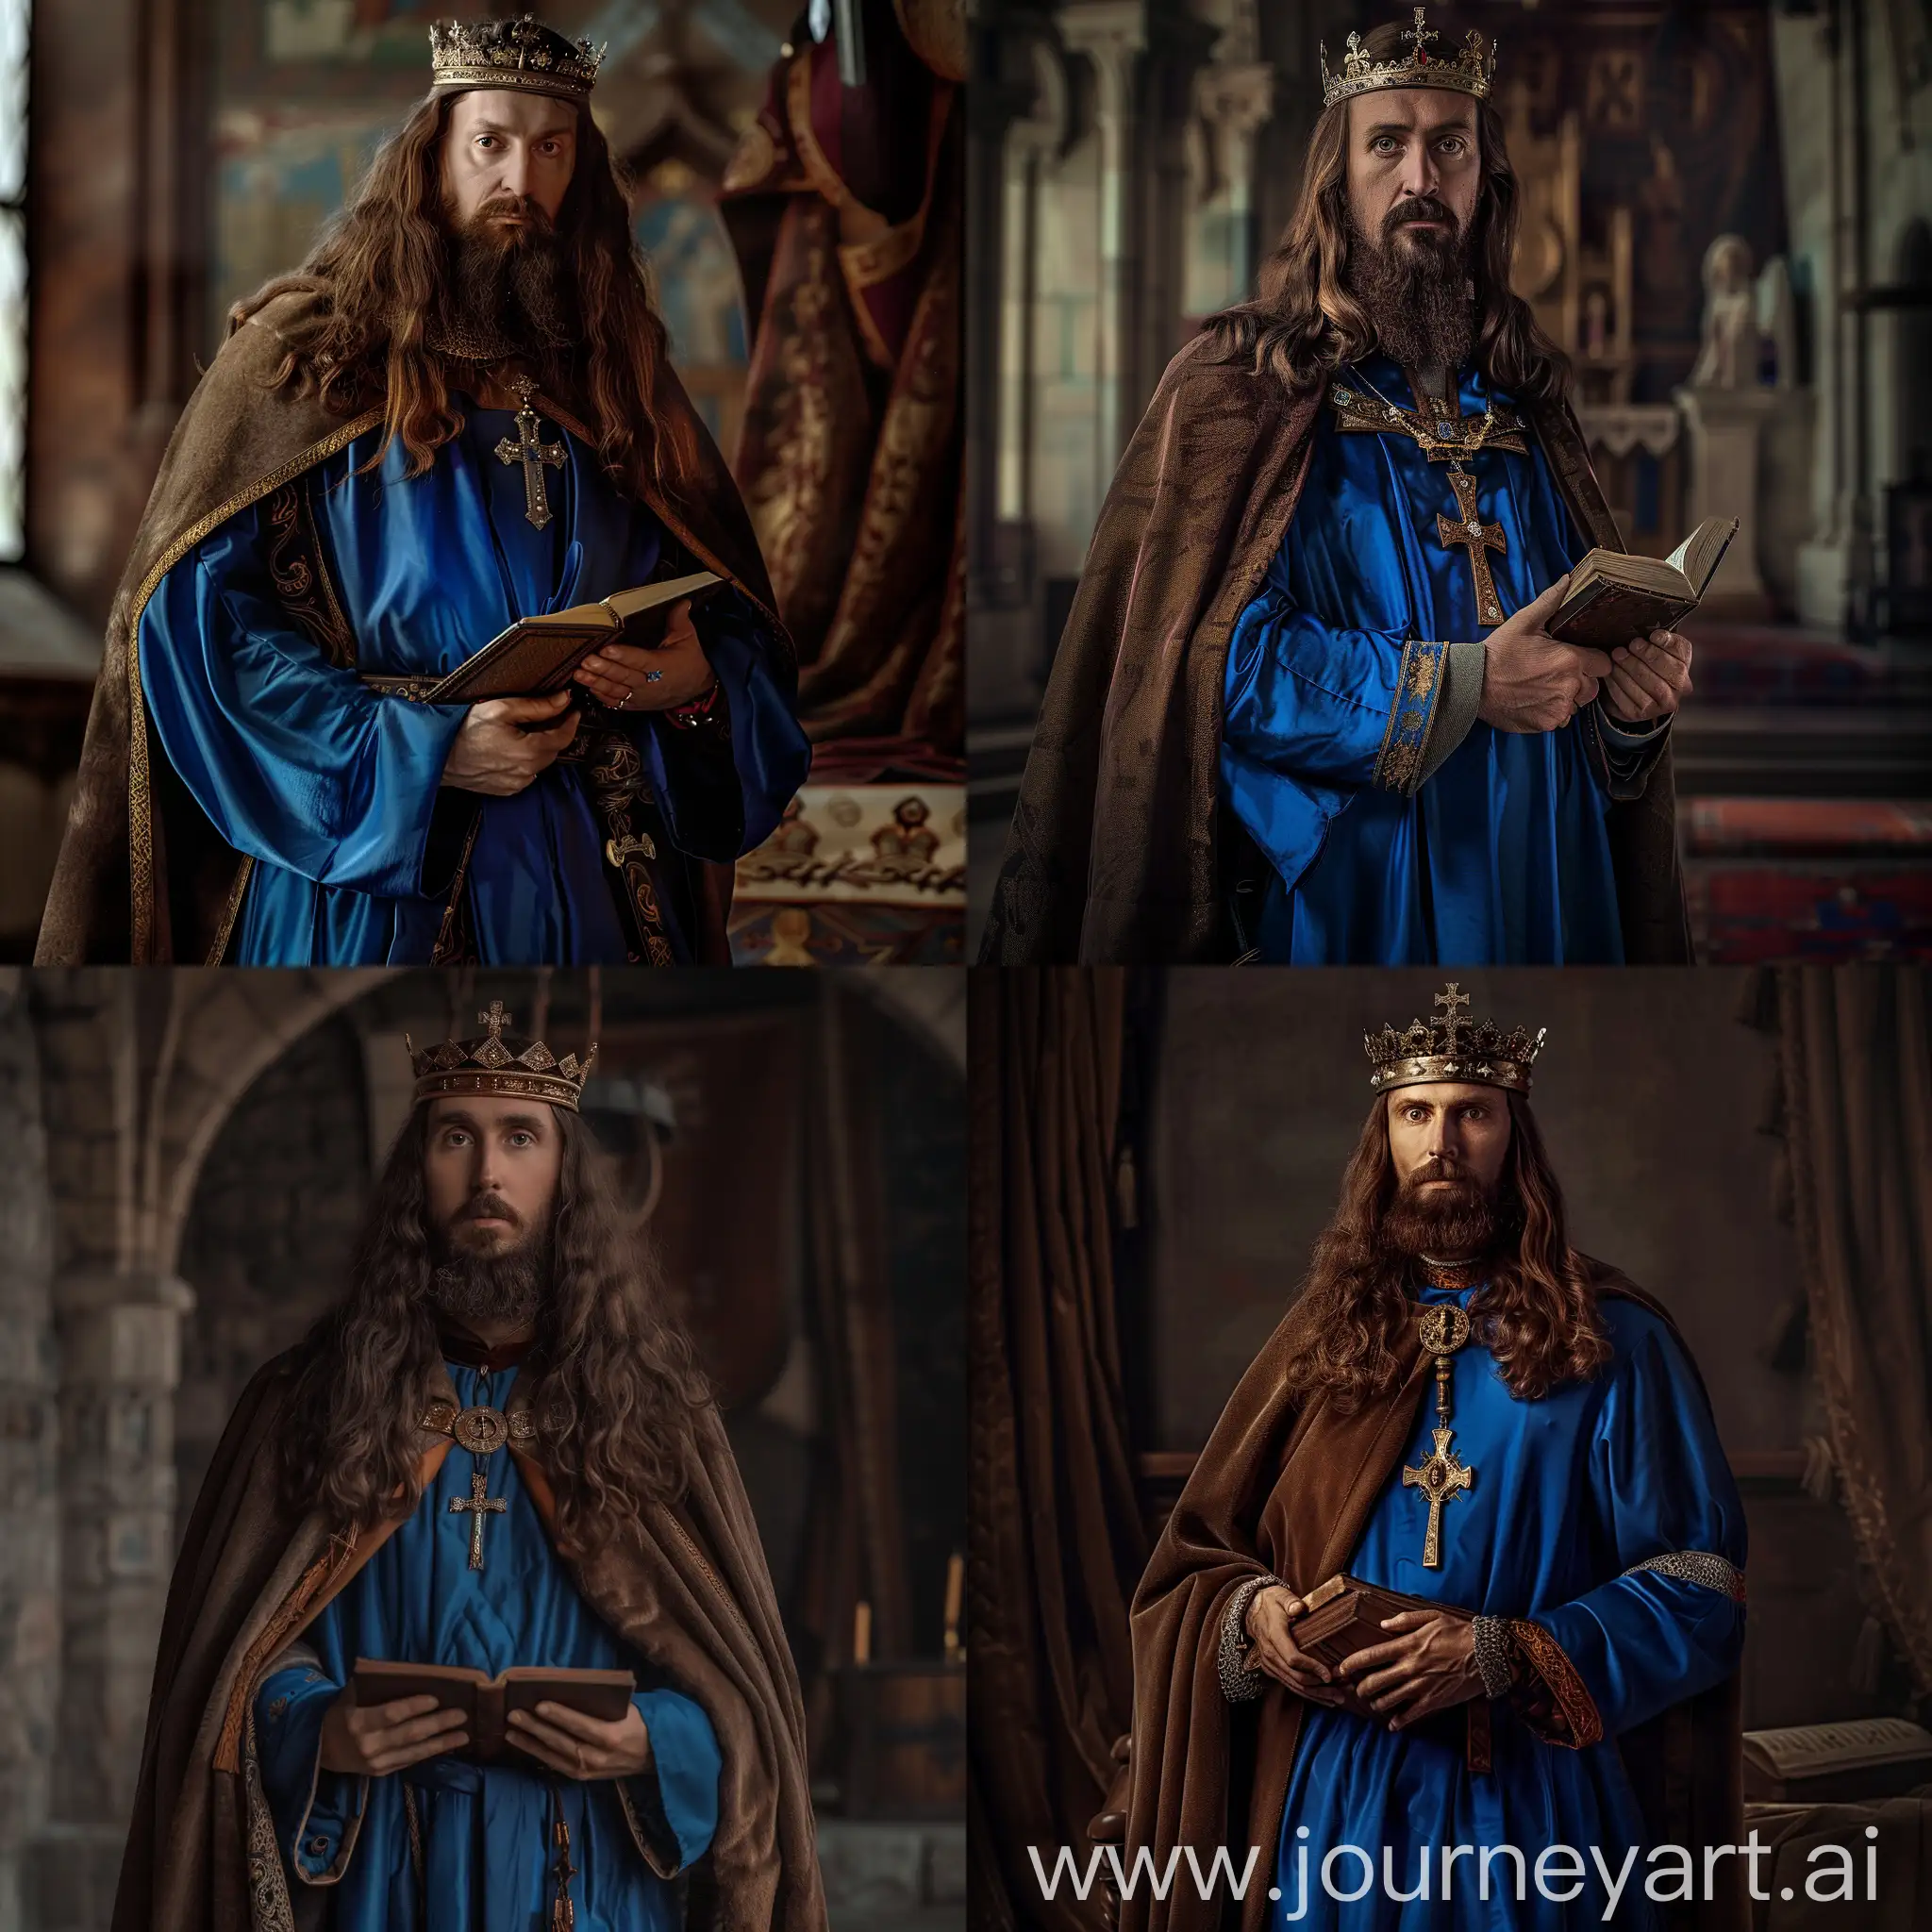 King-Stephen-I-of-Hungary-in-Regal-Attire-with-Medieval-Symbols